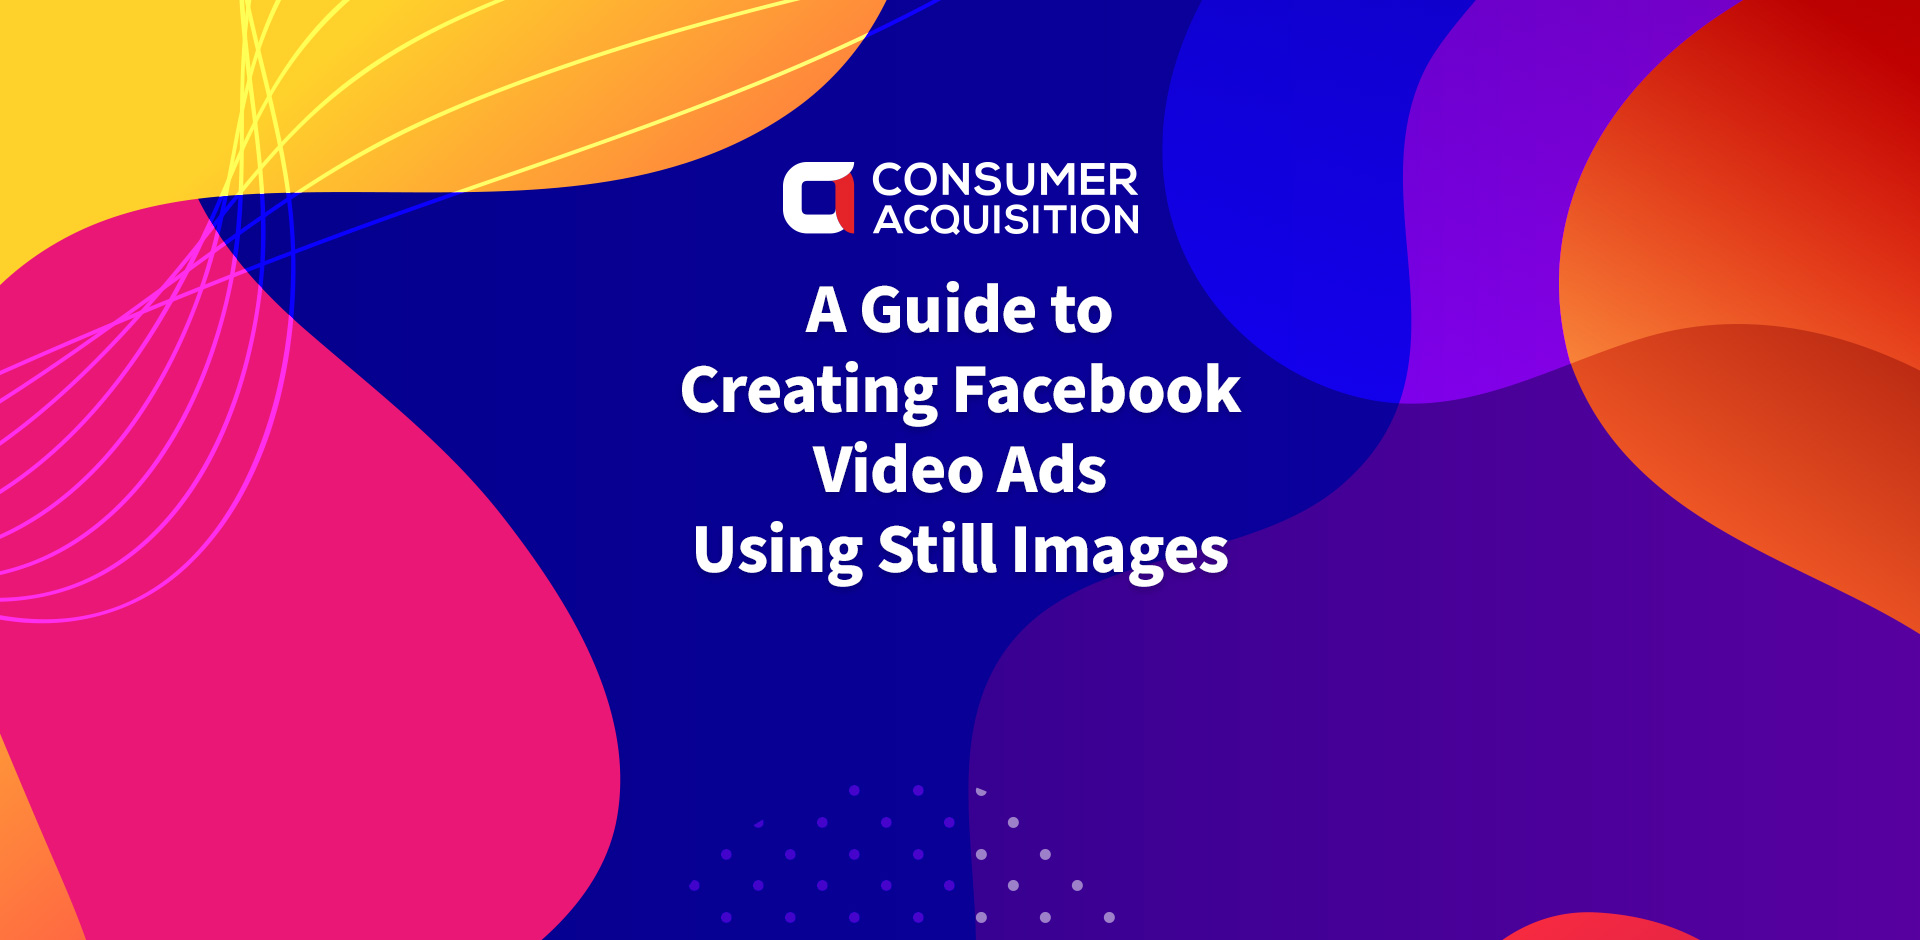 A Guide to Creating Facebook Video Ads Using Still Images